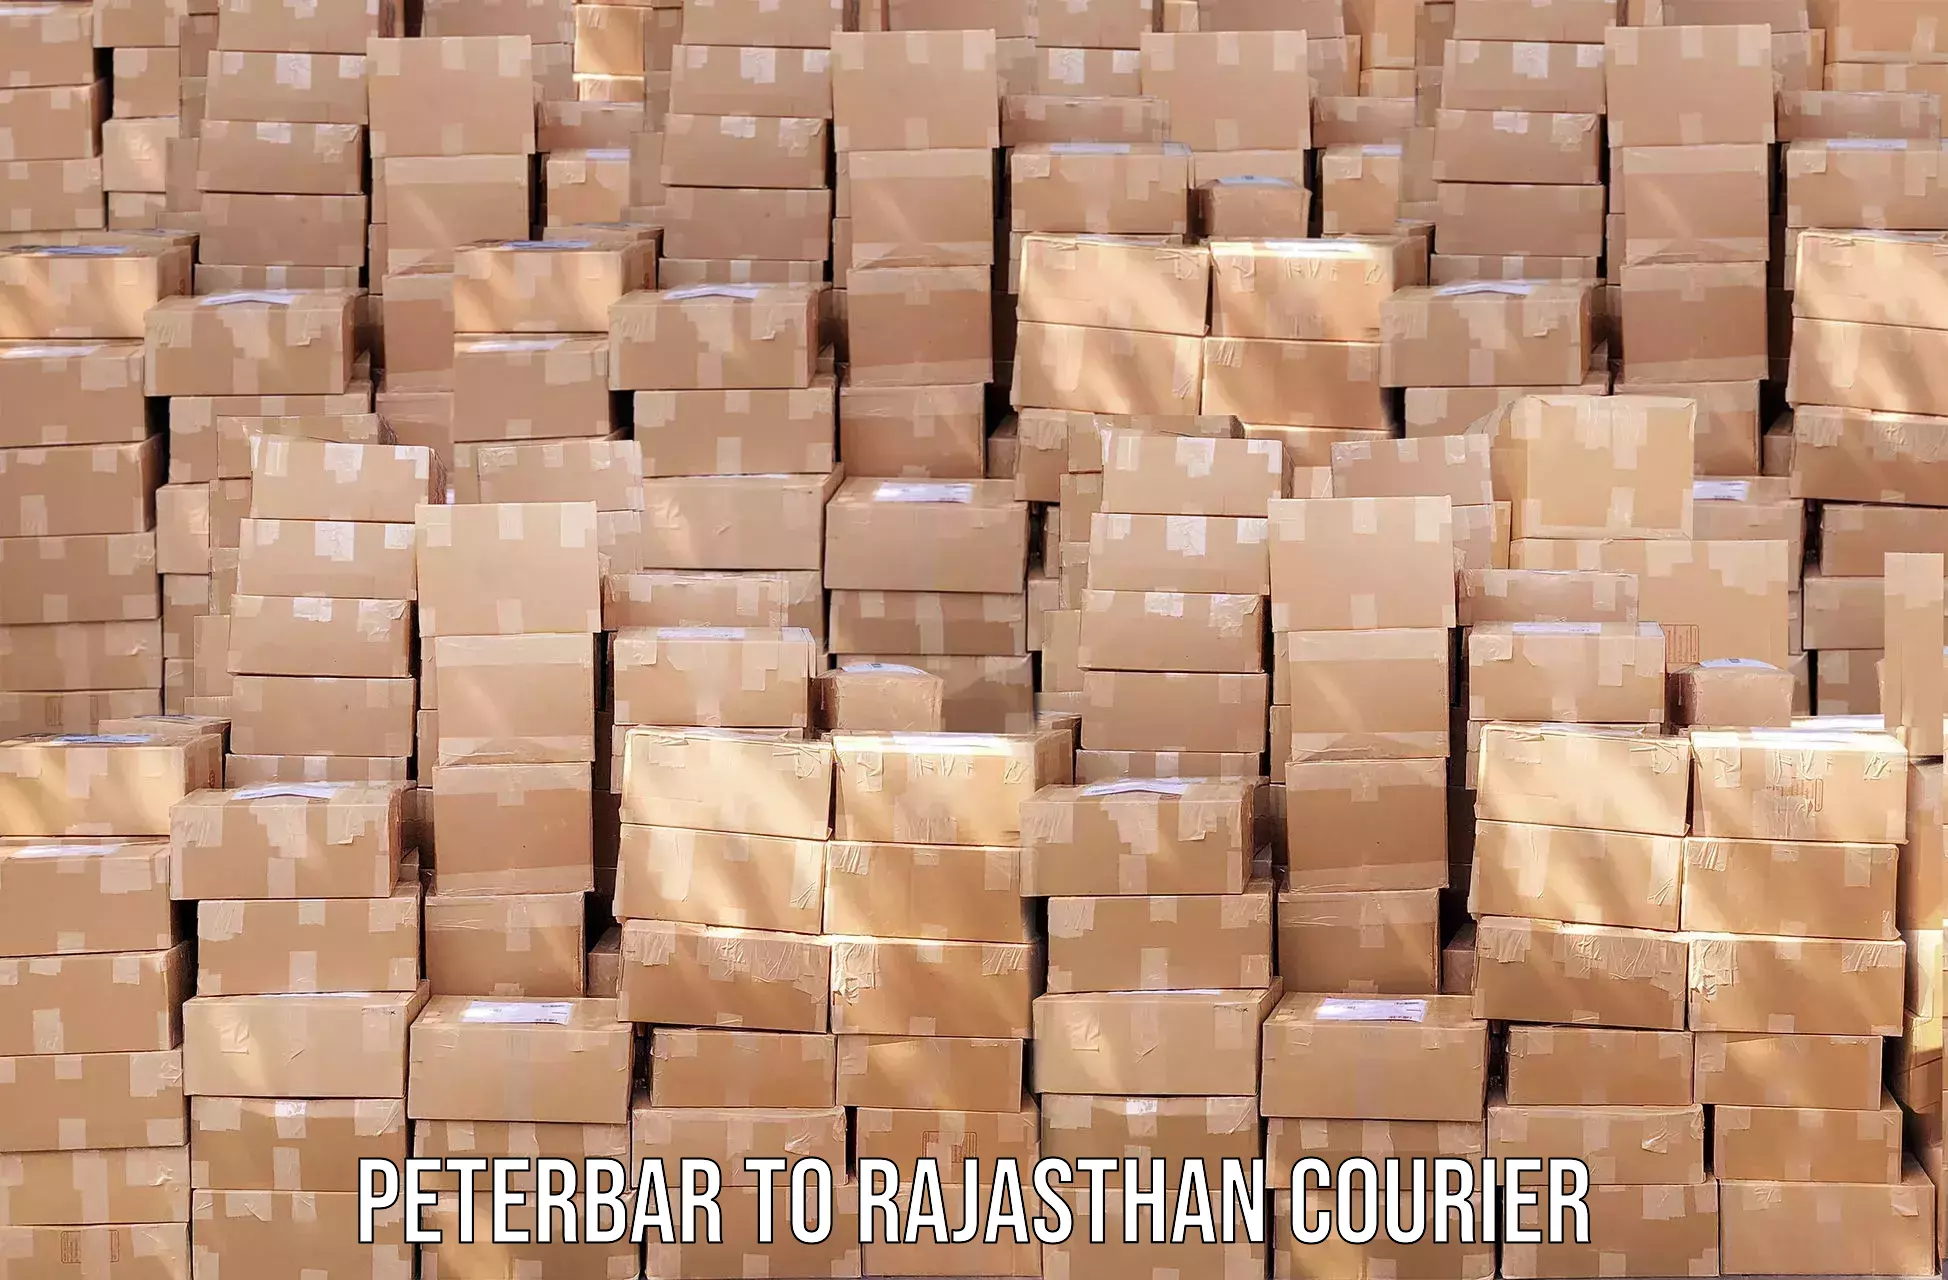 Reliable courier service Peterbar to Asind